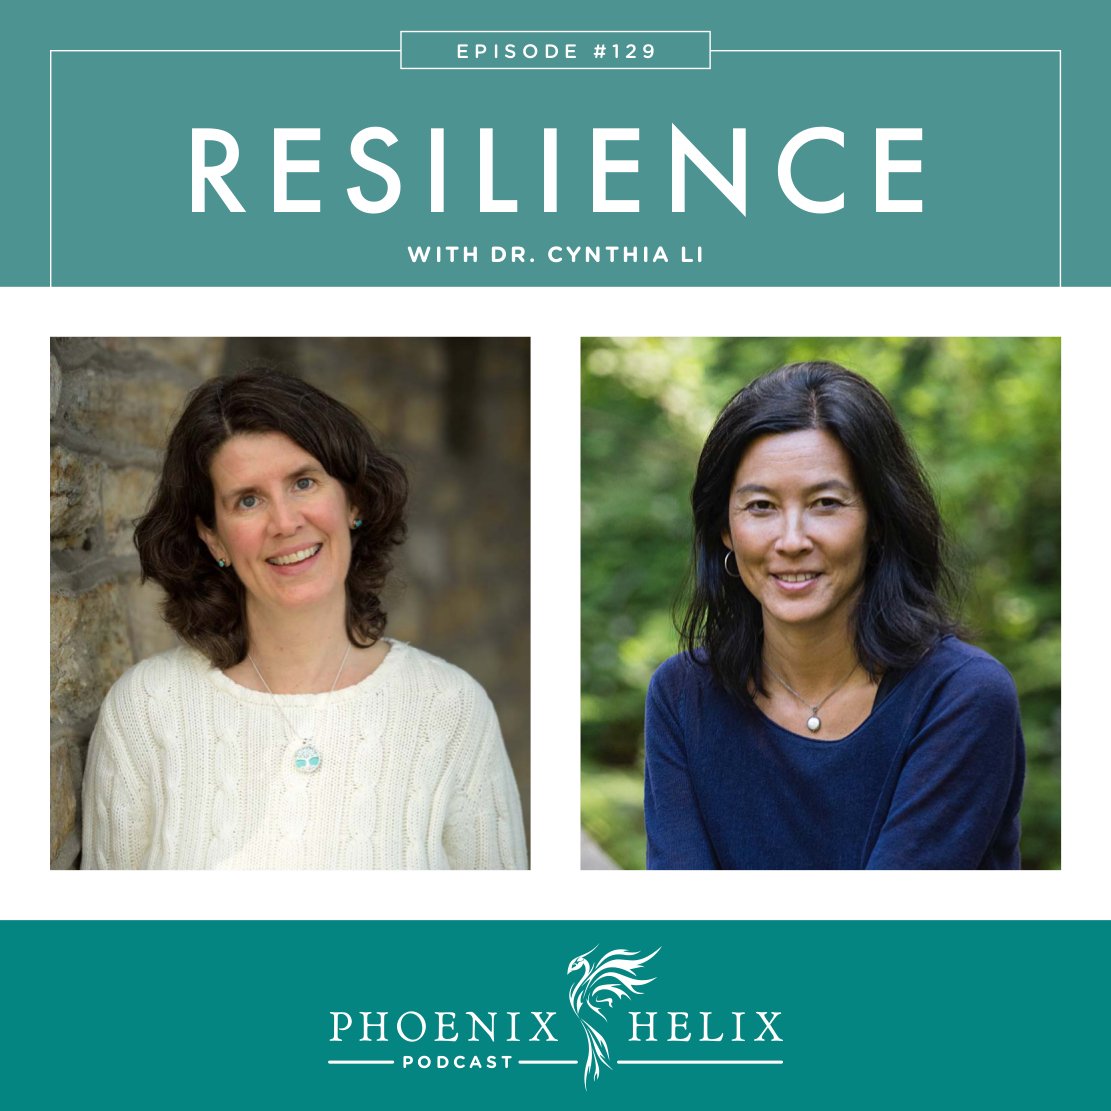 Best of the Phoenix Helix Podcast: Resilience with Dr. Cynthia Li